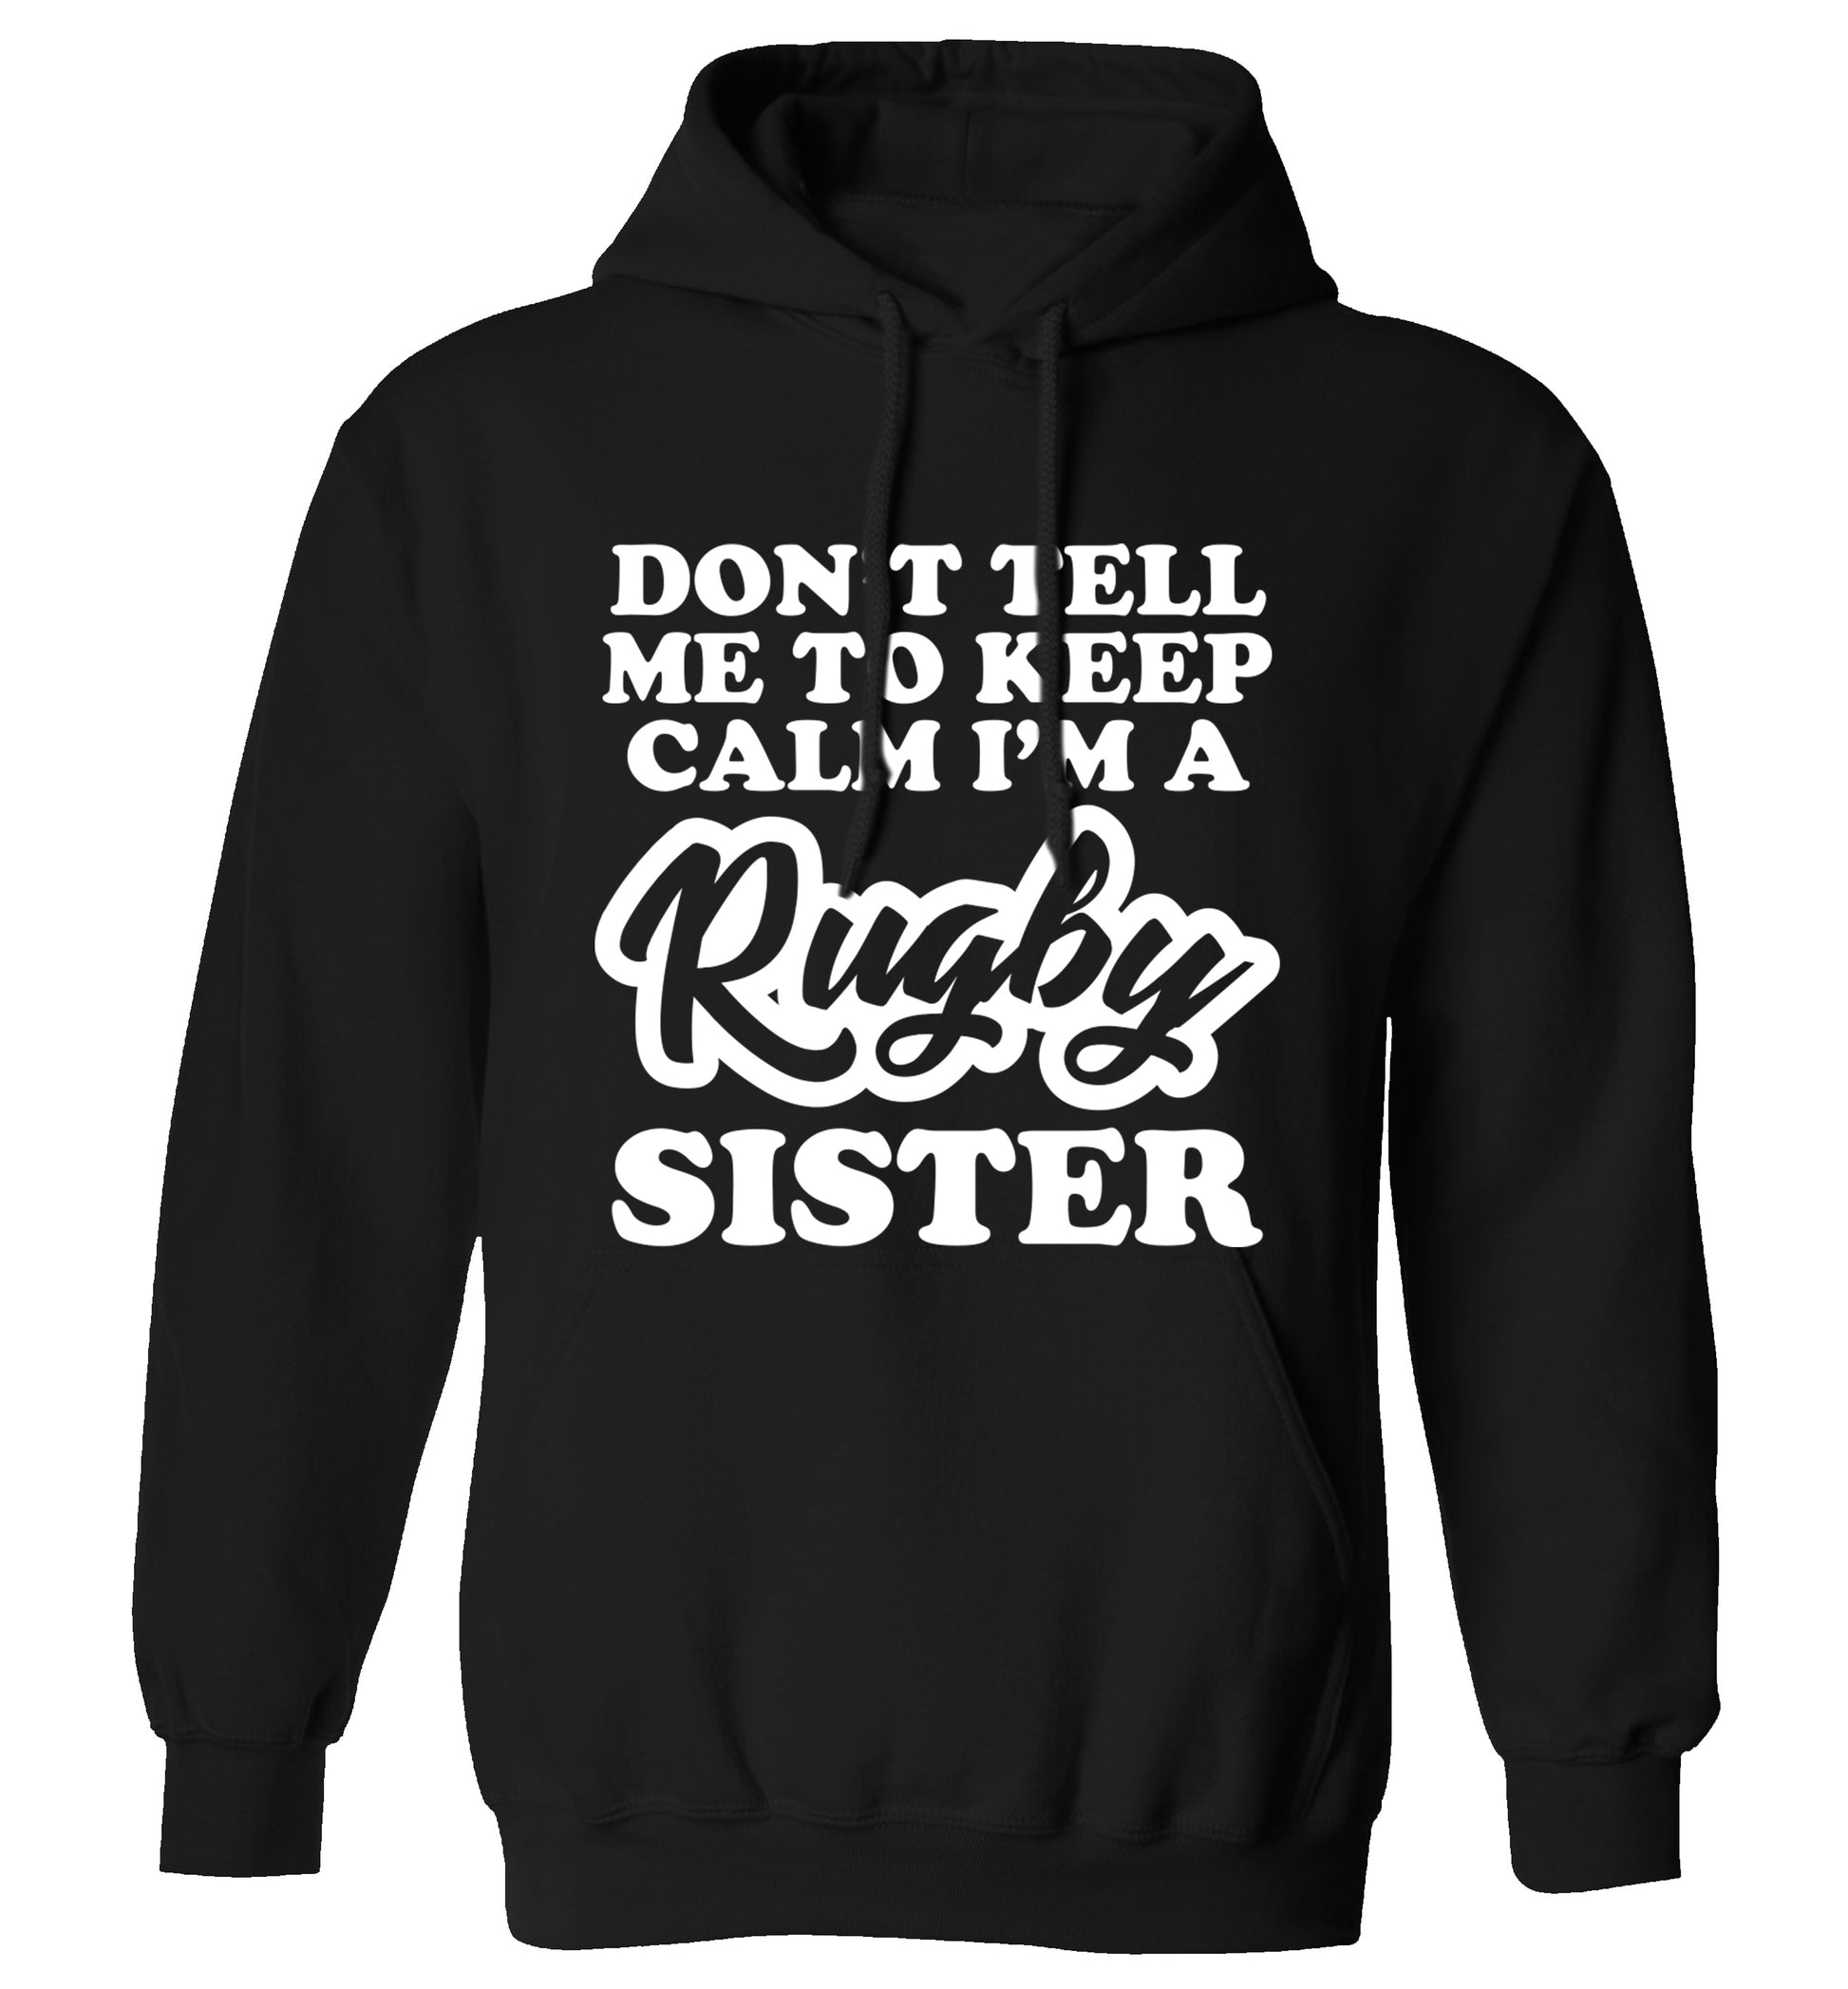 Don't tell me keep calm I'm a rugby sister adults unisex black hoodie 2XL